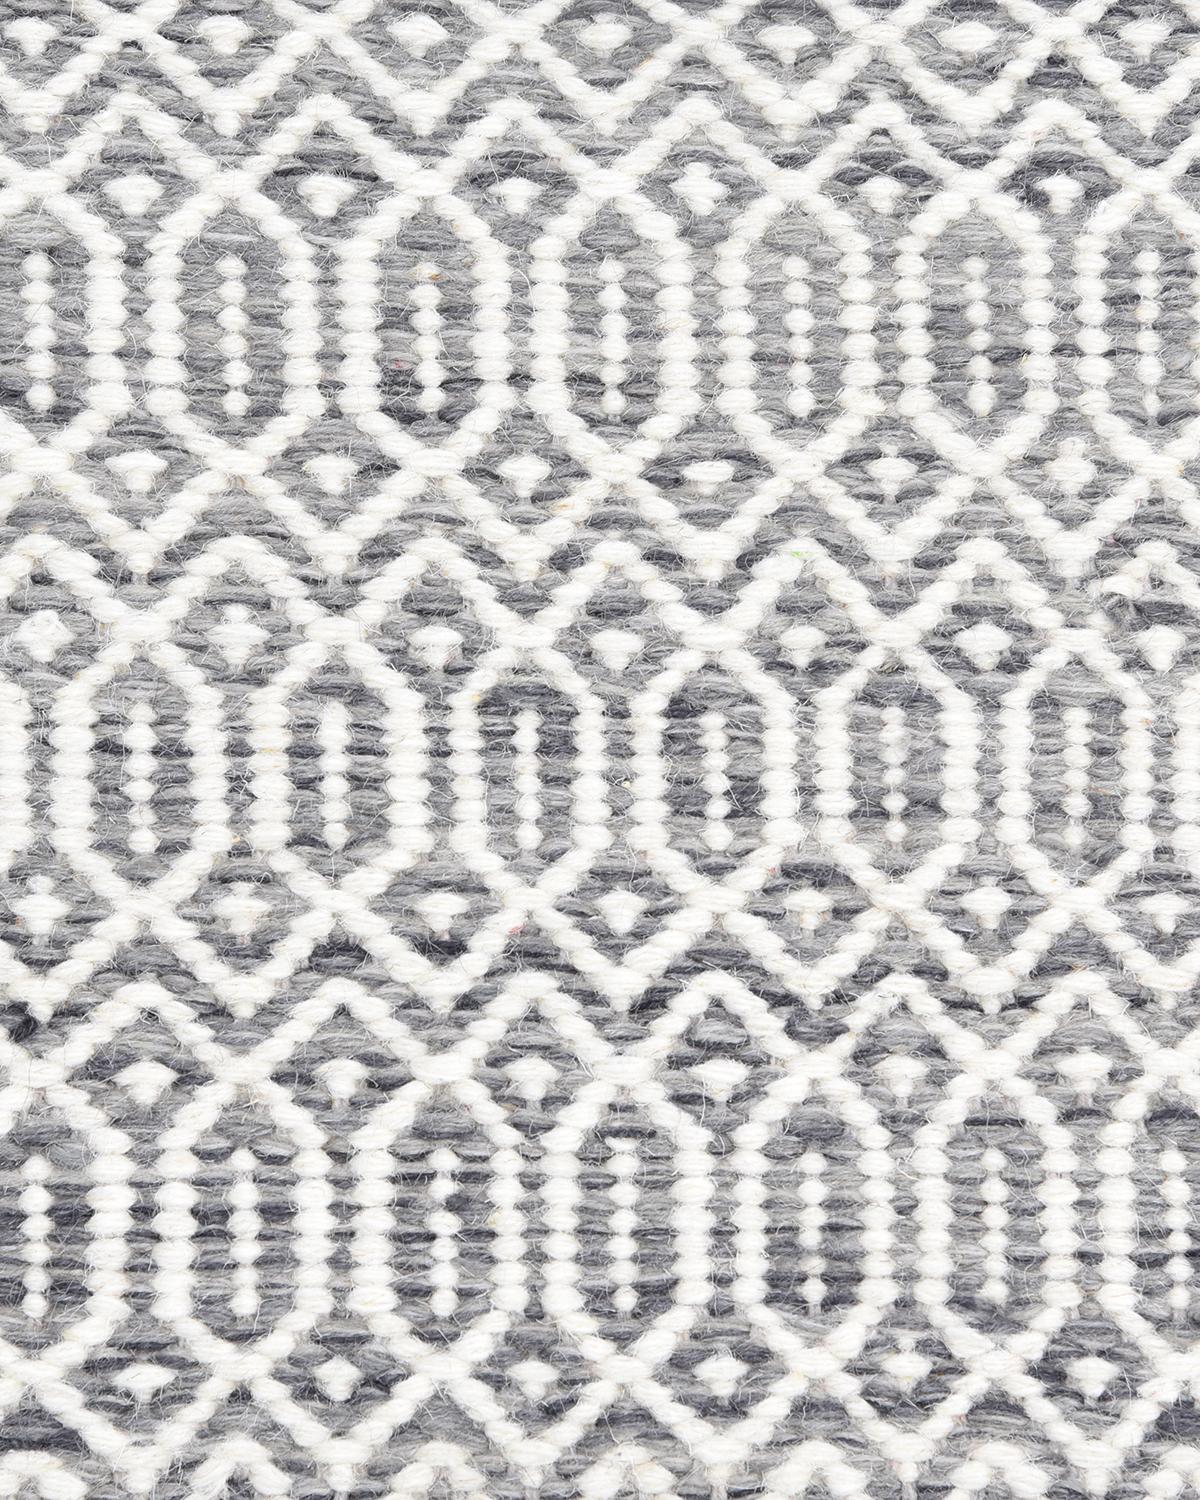 Indian Solo Rugs Flatweave Geometric Hand Woven Gray Runner Area Rug For Sale